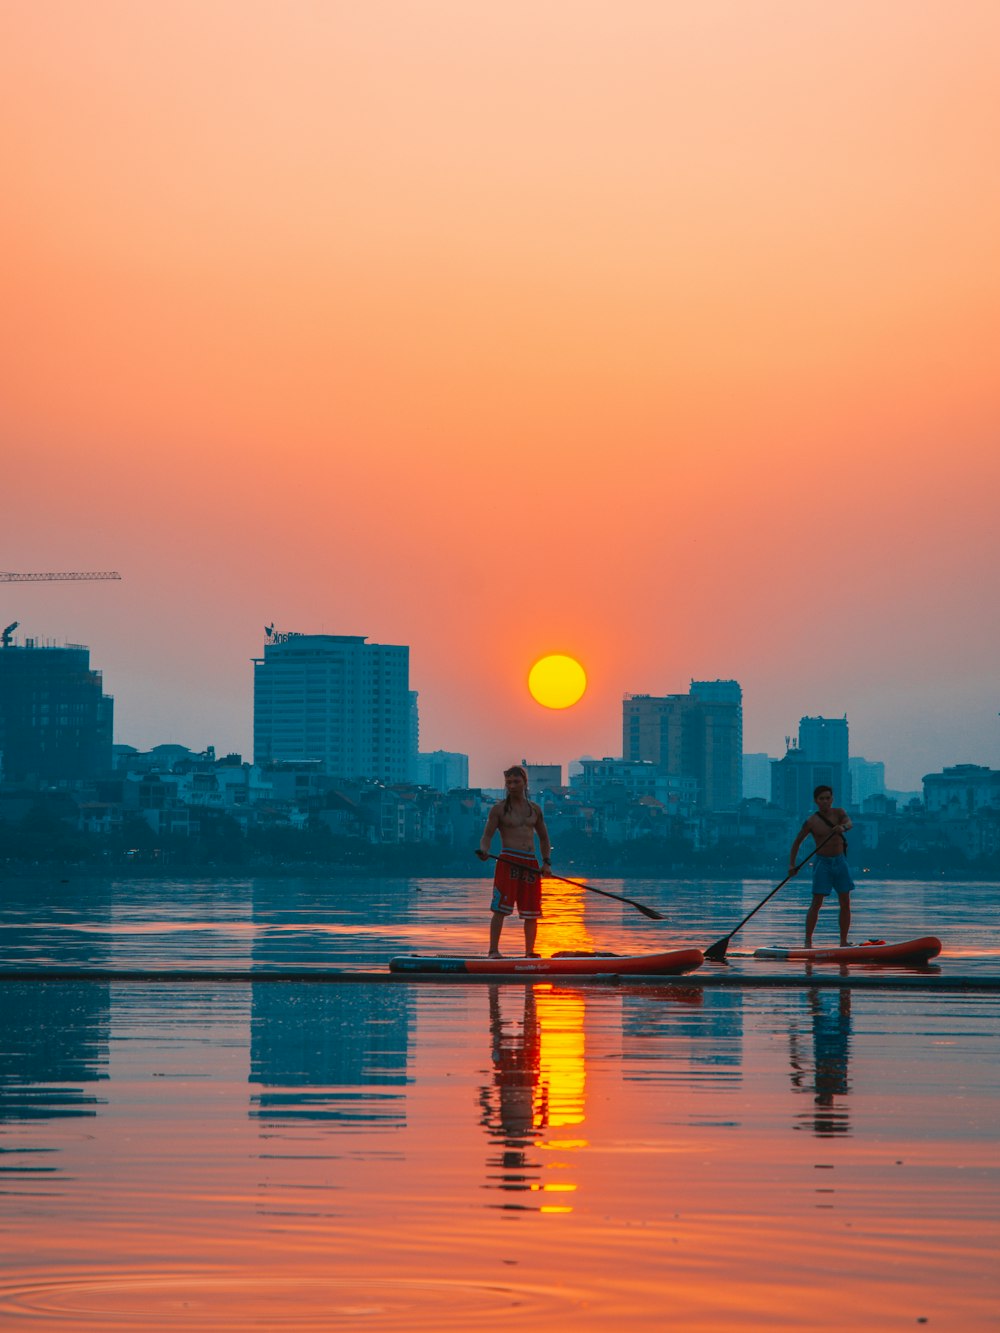 two topless men standing on paddle board on body of water viewing city with high-rise buildings under orange sky